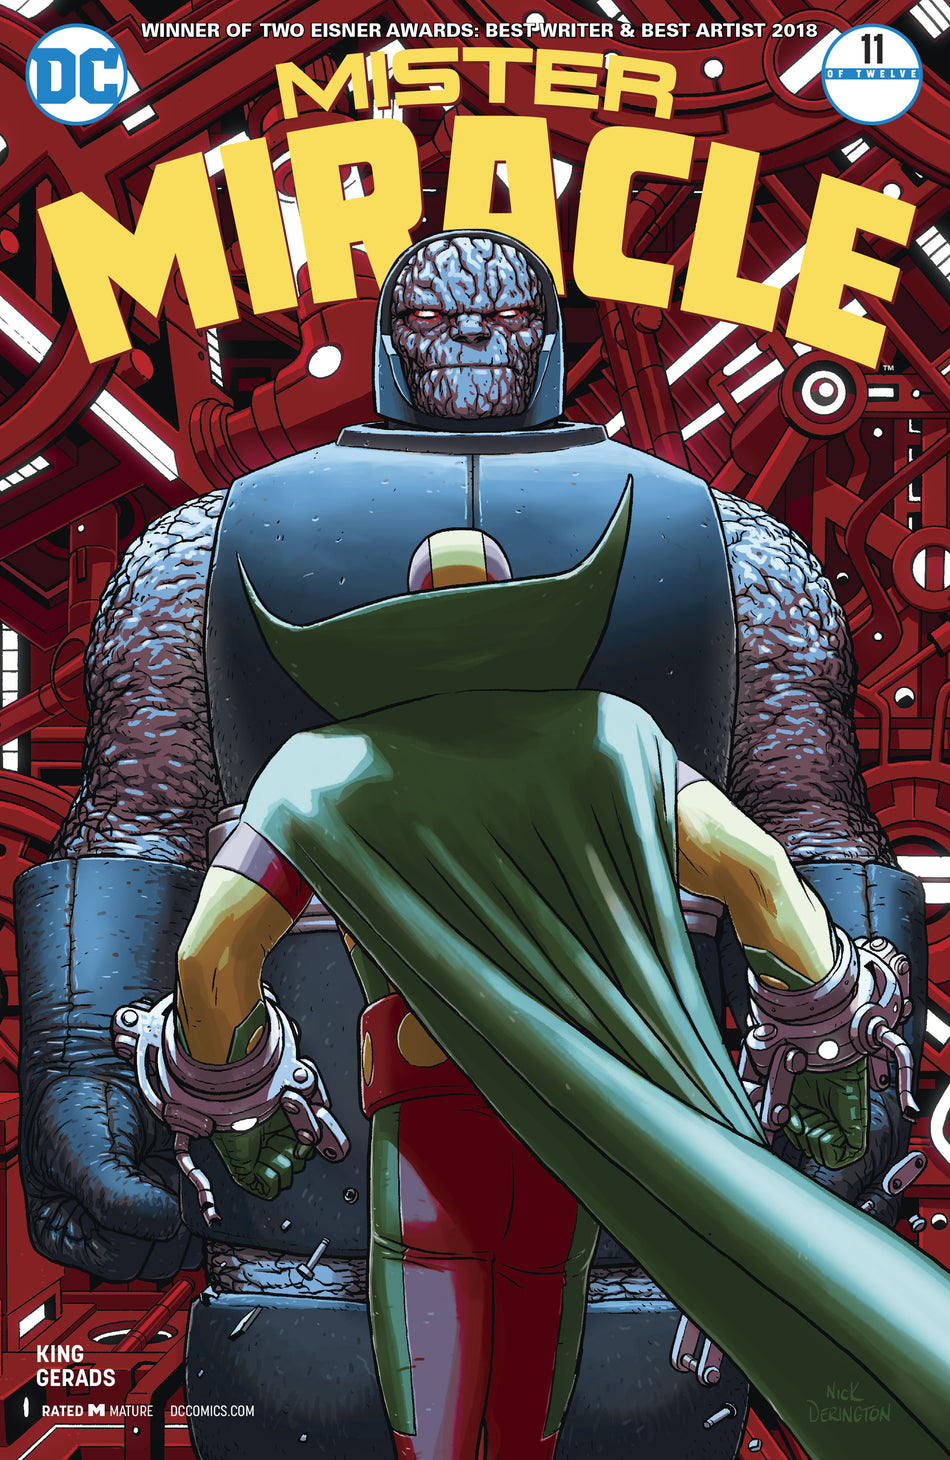 Photo of Mister Miracle Issue 11 (of 12) comic sold by Stronghold Collectibles